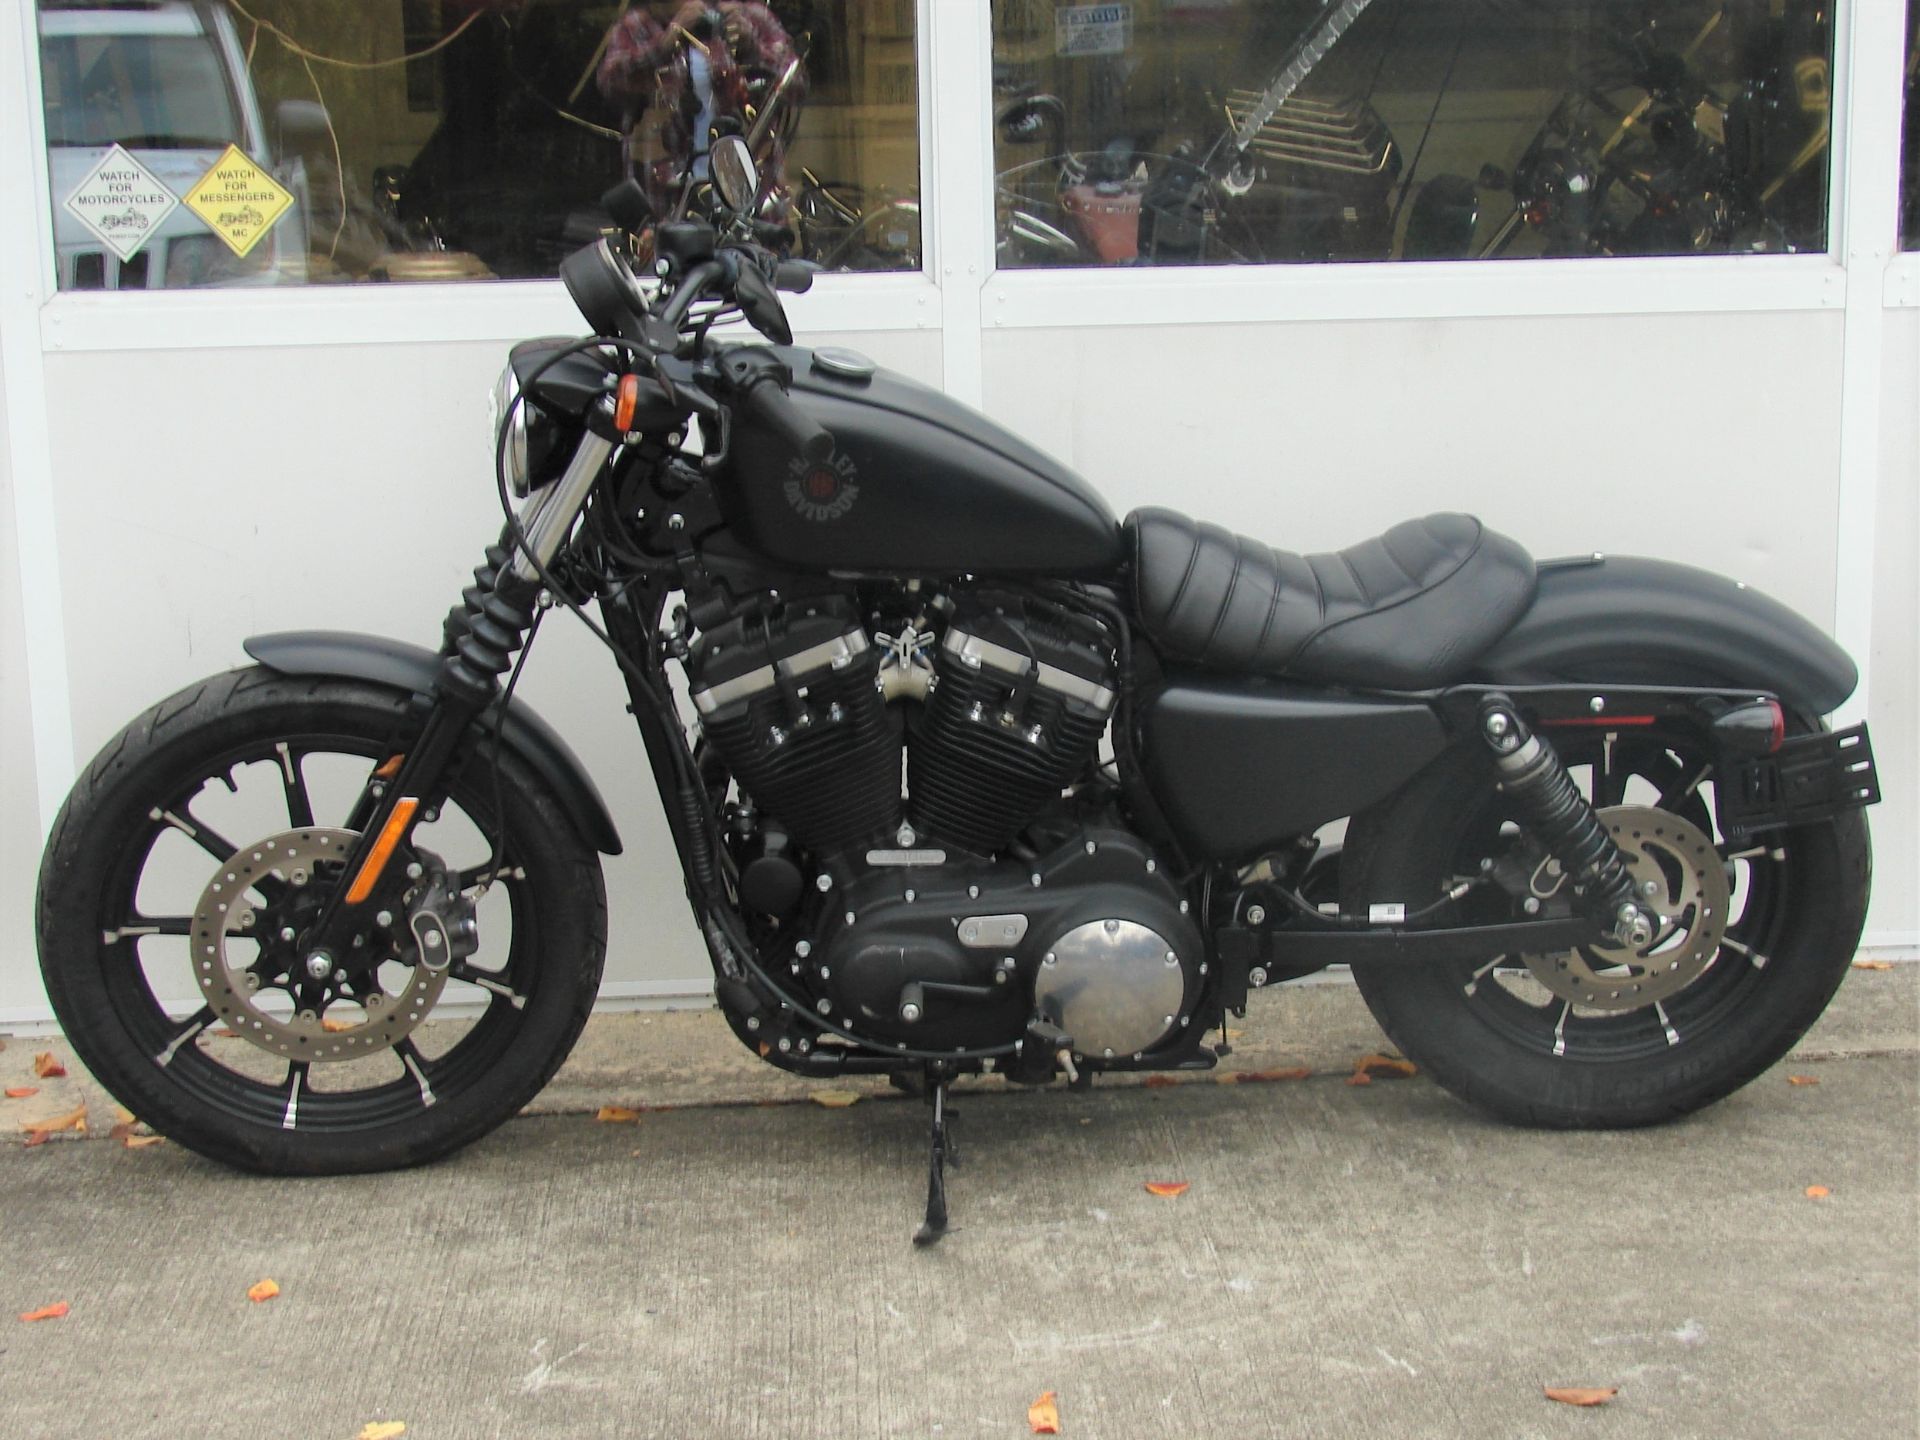 2019 Harley-Davidson XL 883N Iron Nightster Sportster in Williamstown, New Jersey - Photo 5